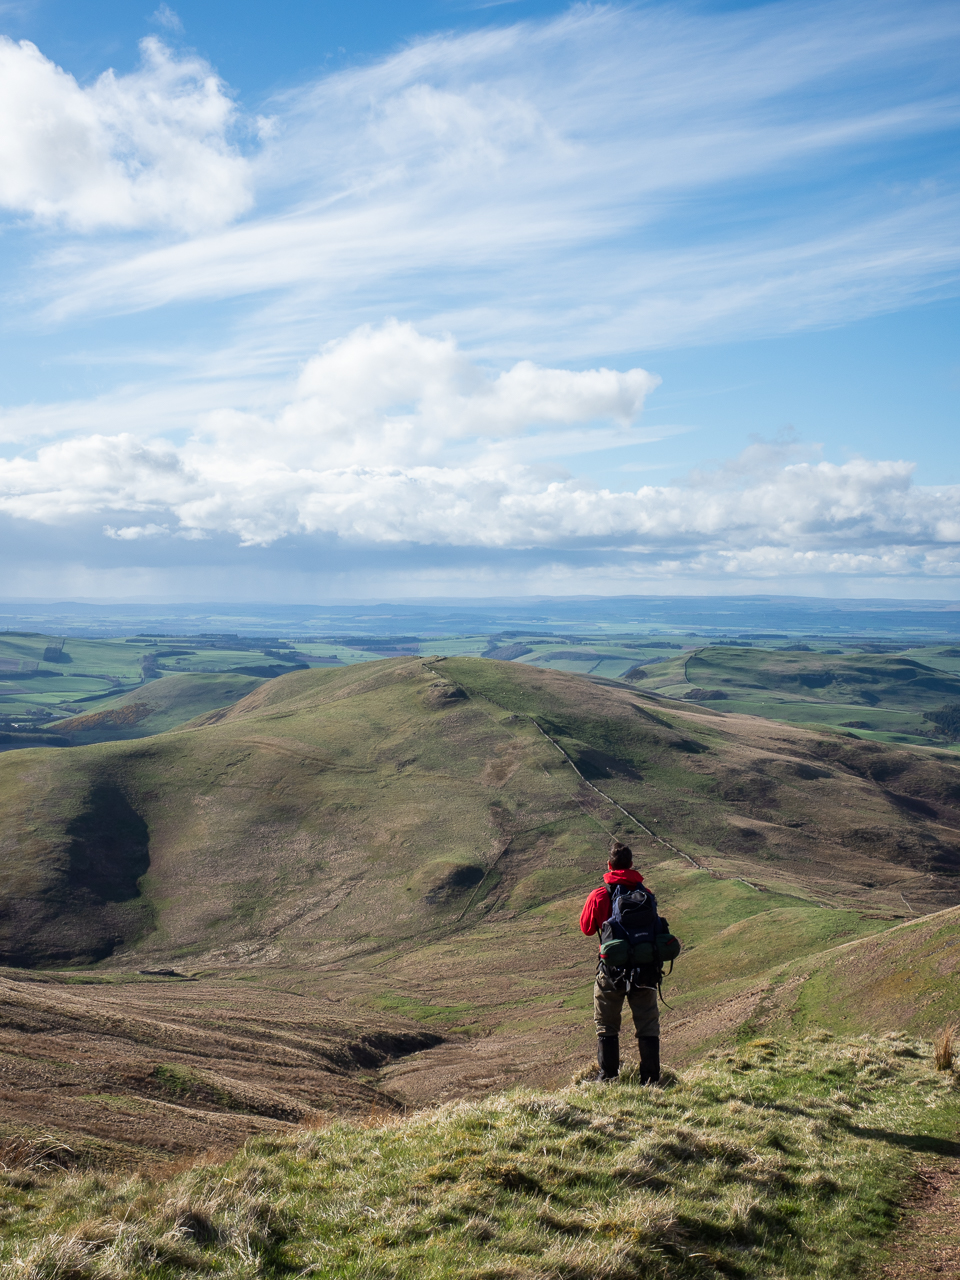 A man reviews scenery on the Pennine Way long-distance footpath through the Cheviot Hills on the border between England and Scotland on 26 April 2018.